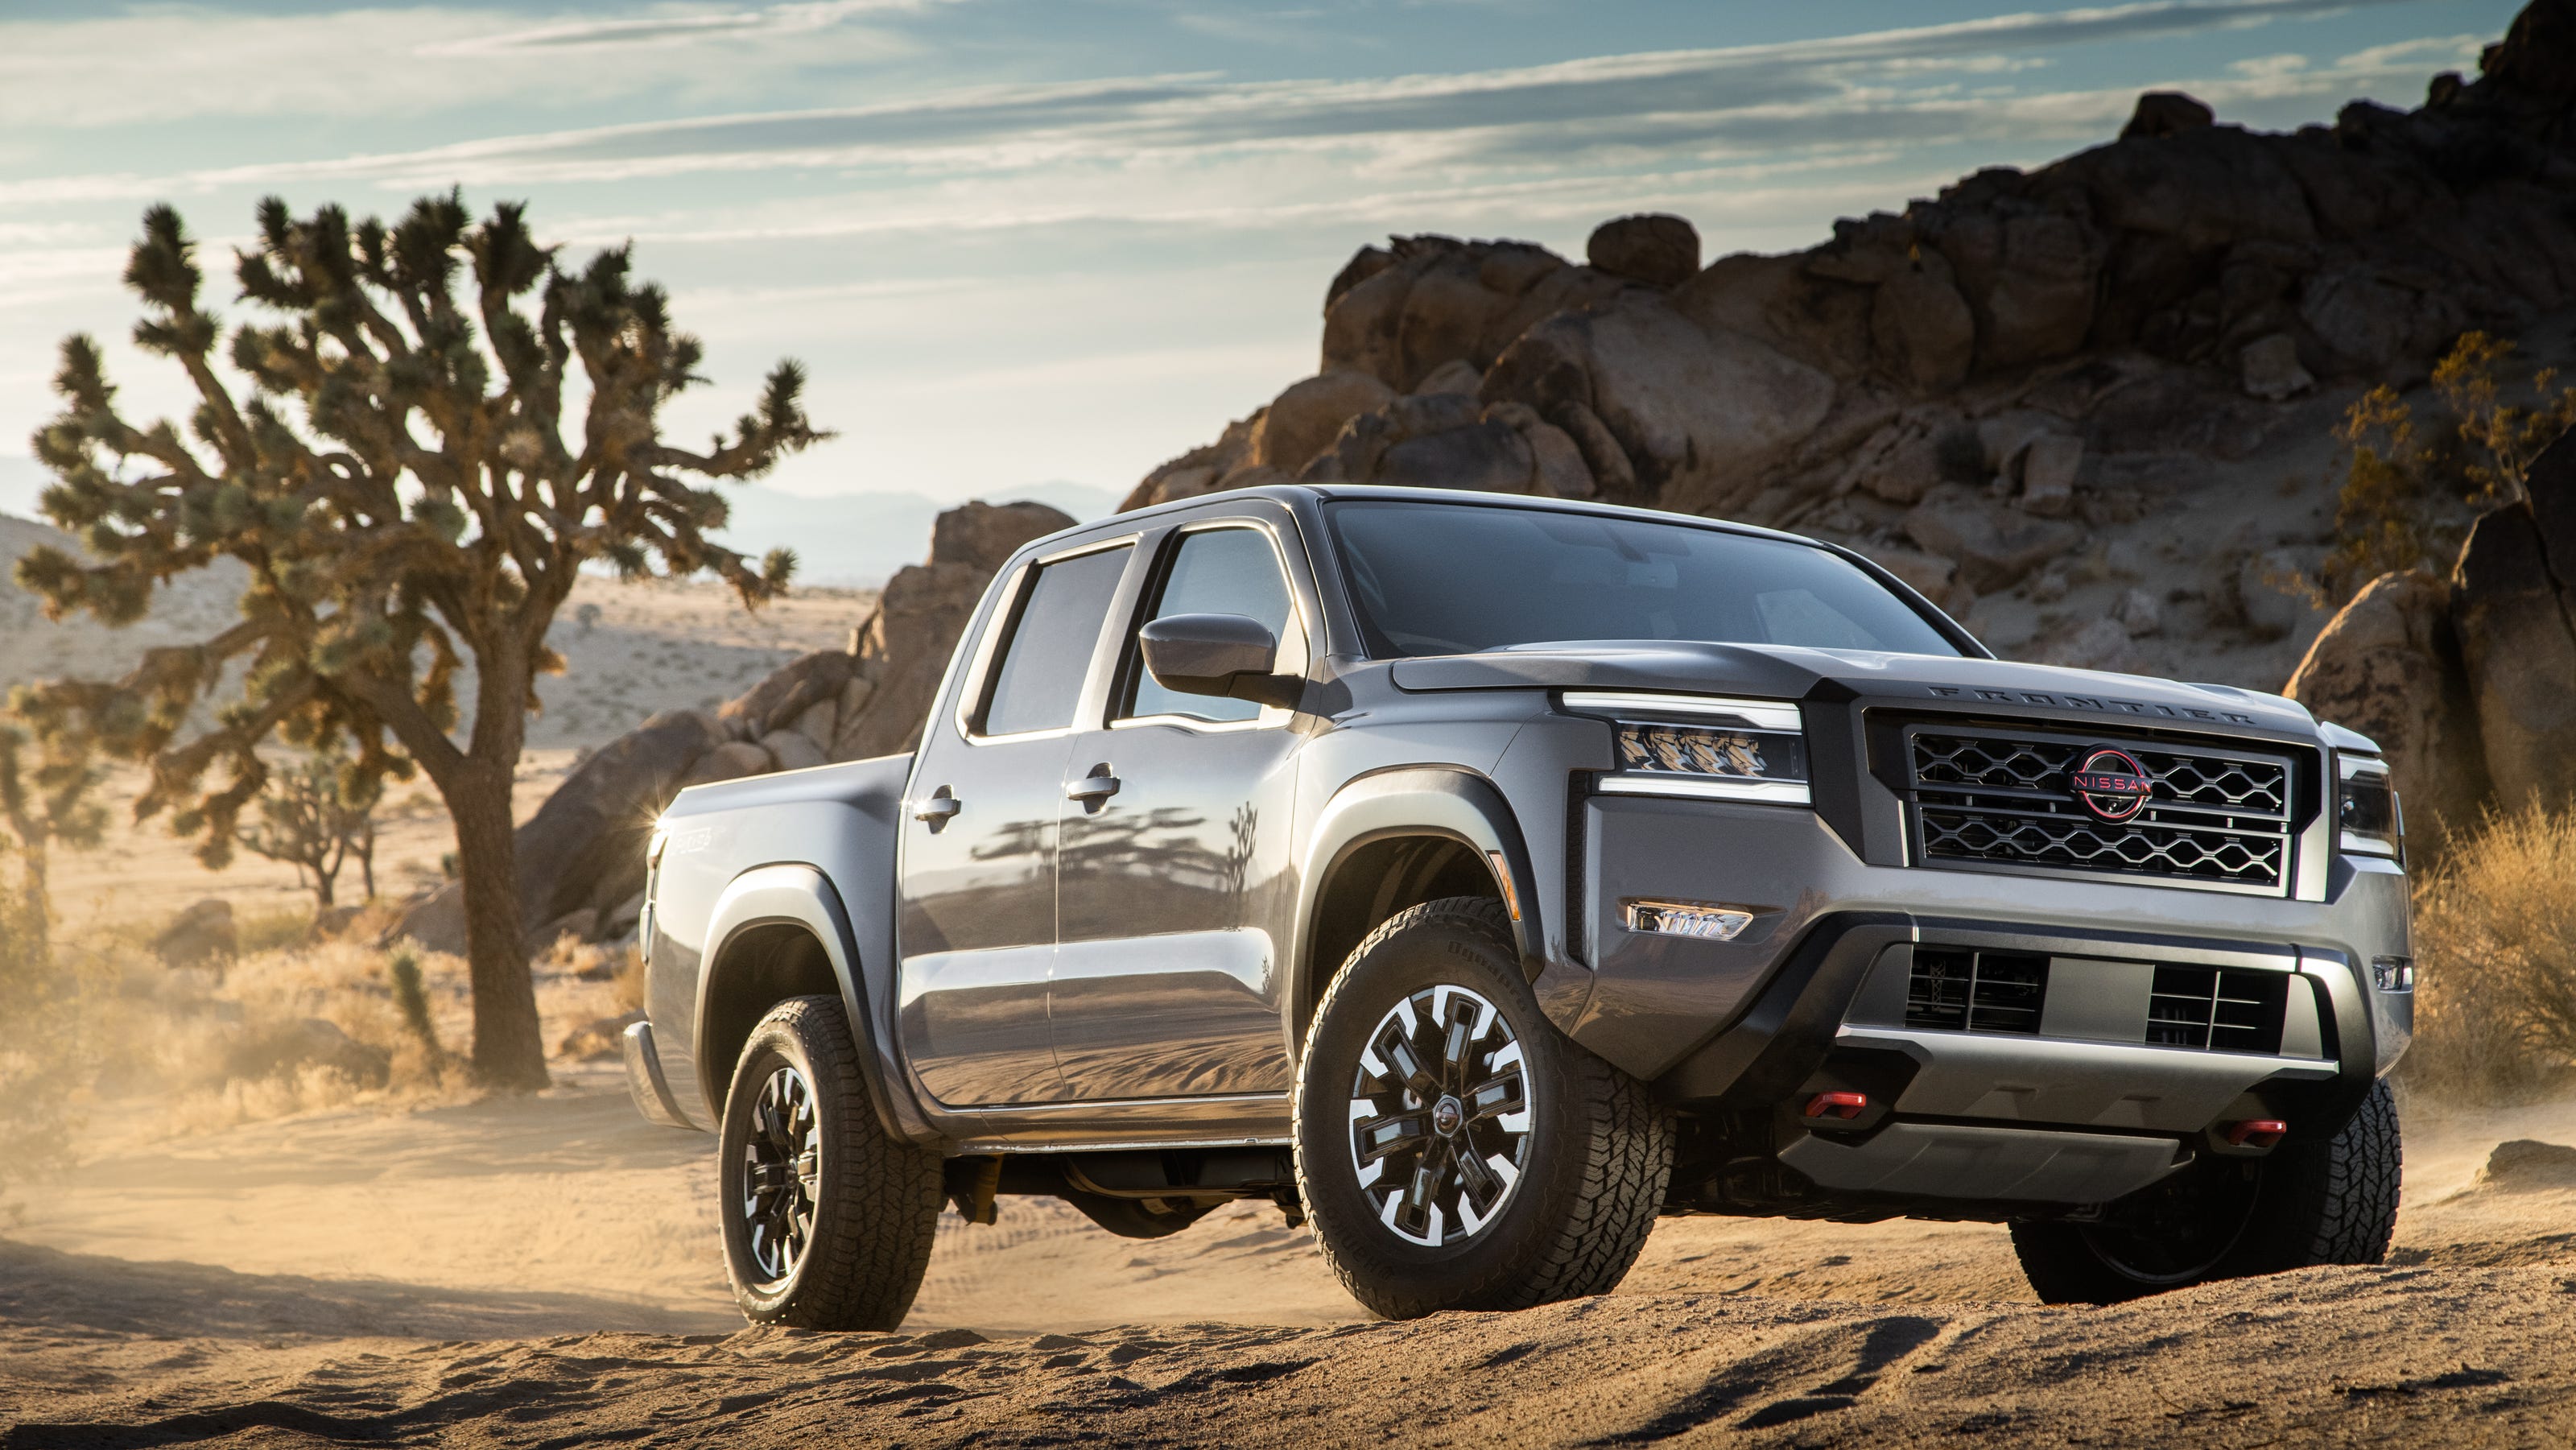 New 2022 Nissan Frontier and Pathfinder recall 1980s trucks